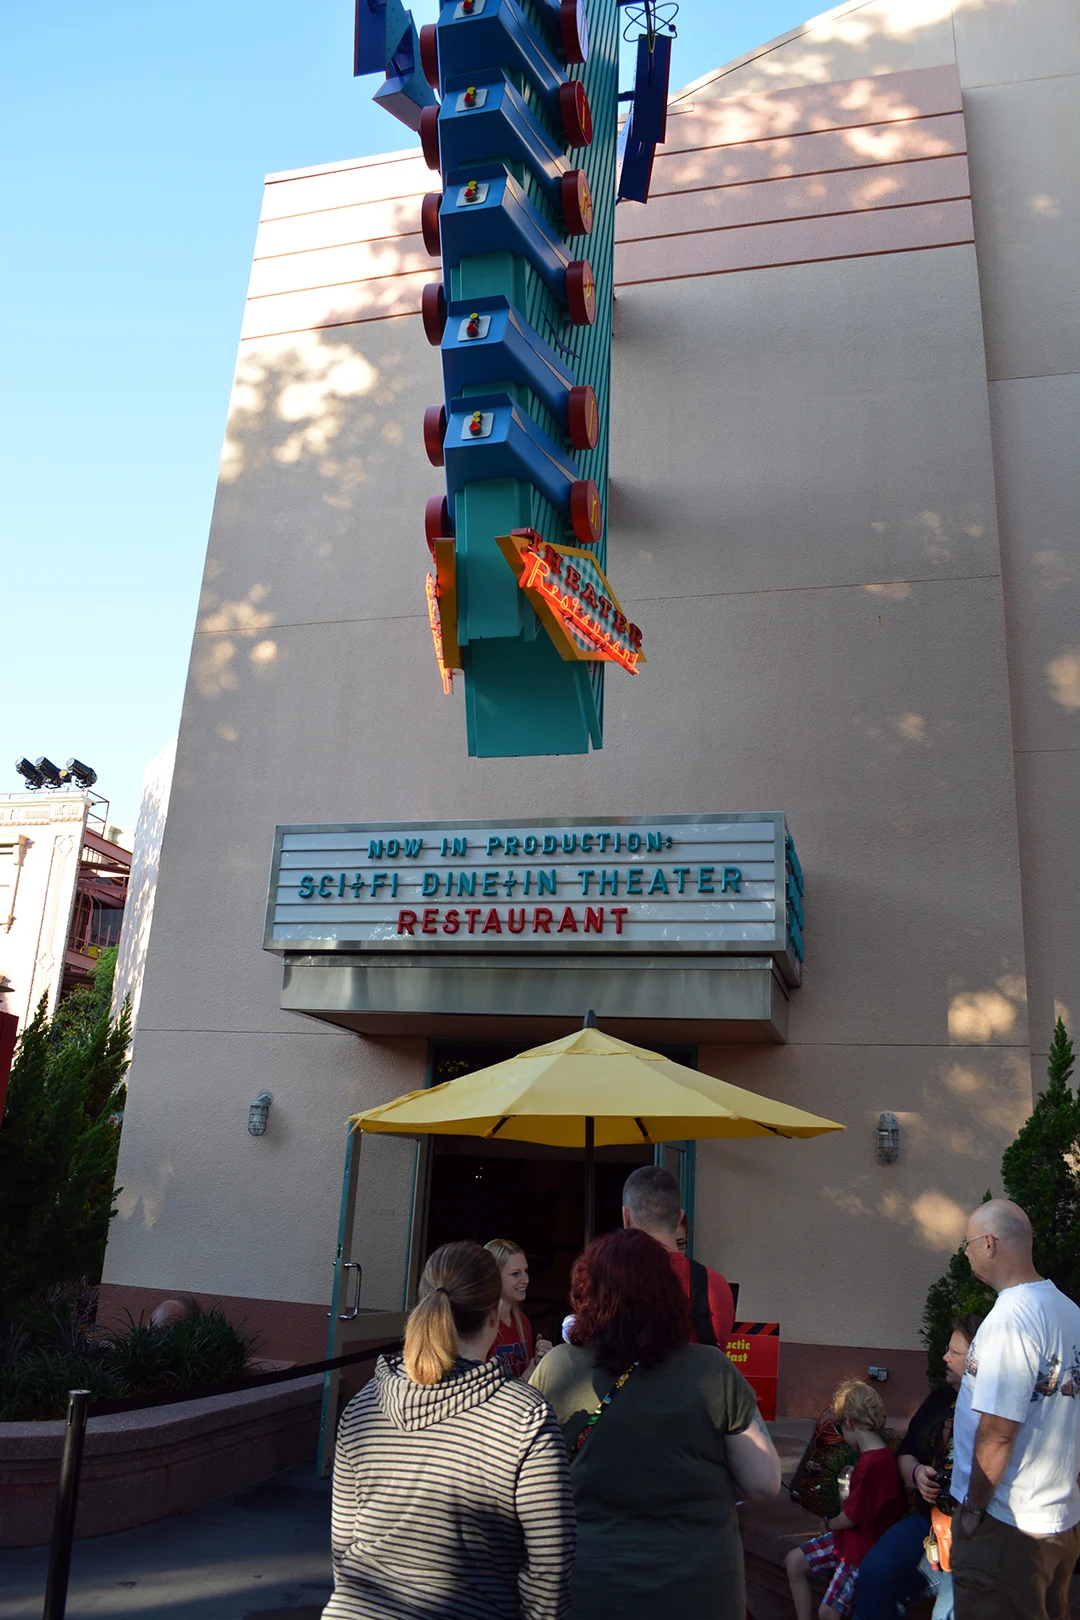 Star Wars Galactic Dine-in Character Breakfast at Hollywood Studios